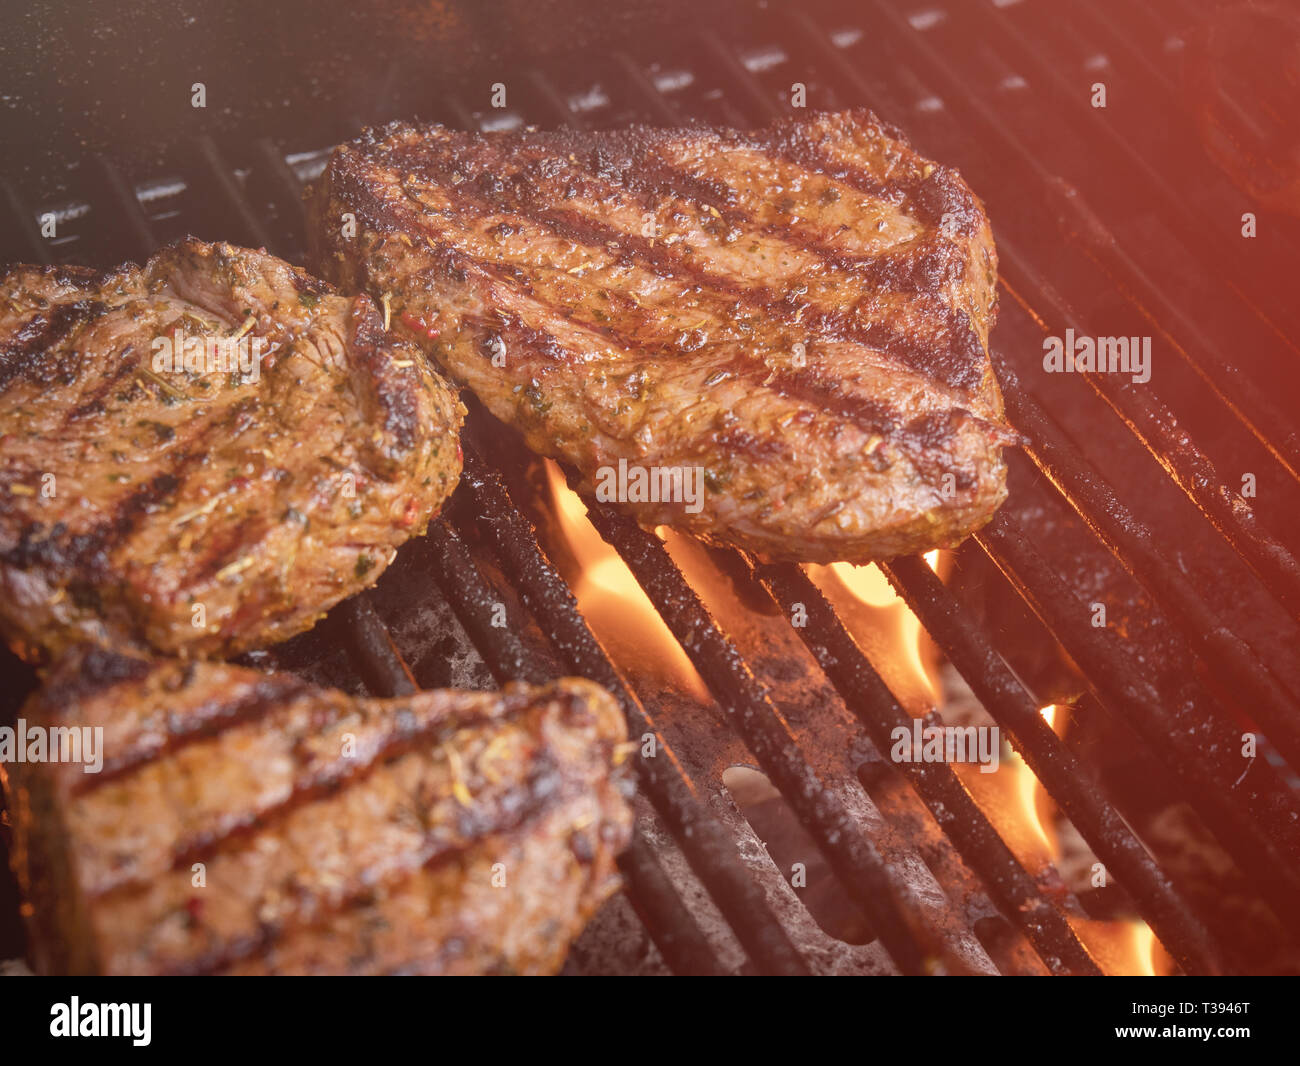 Grilled Beaf Meat On Rust Stock Photo Alamy